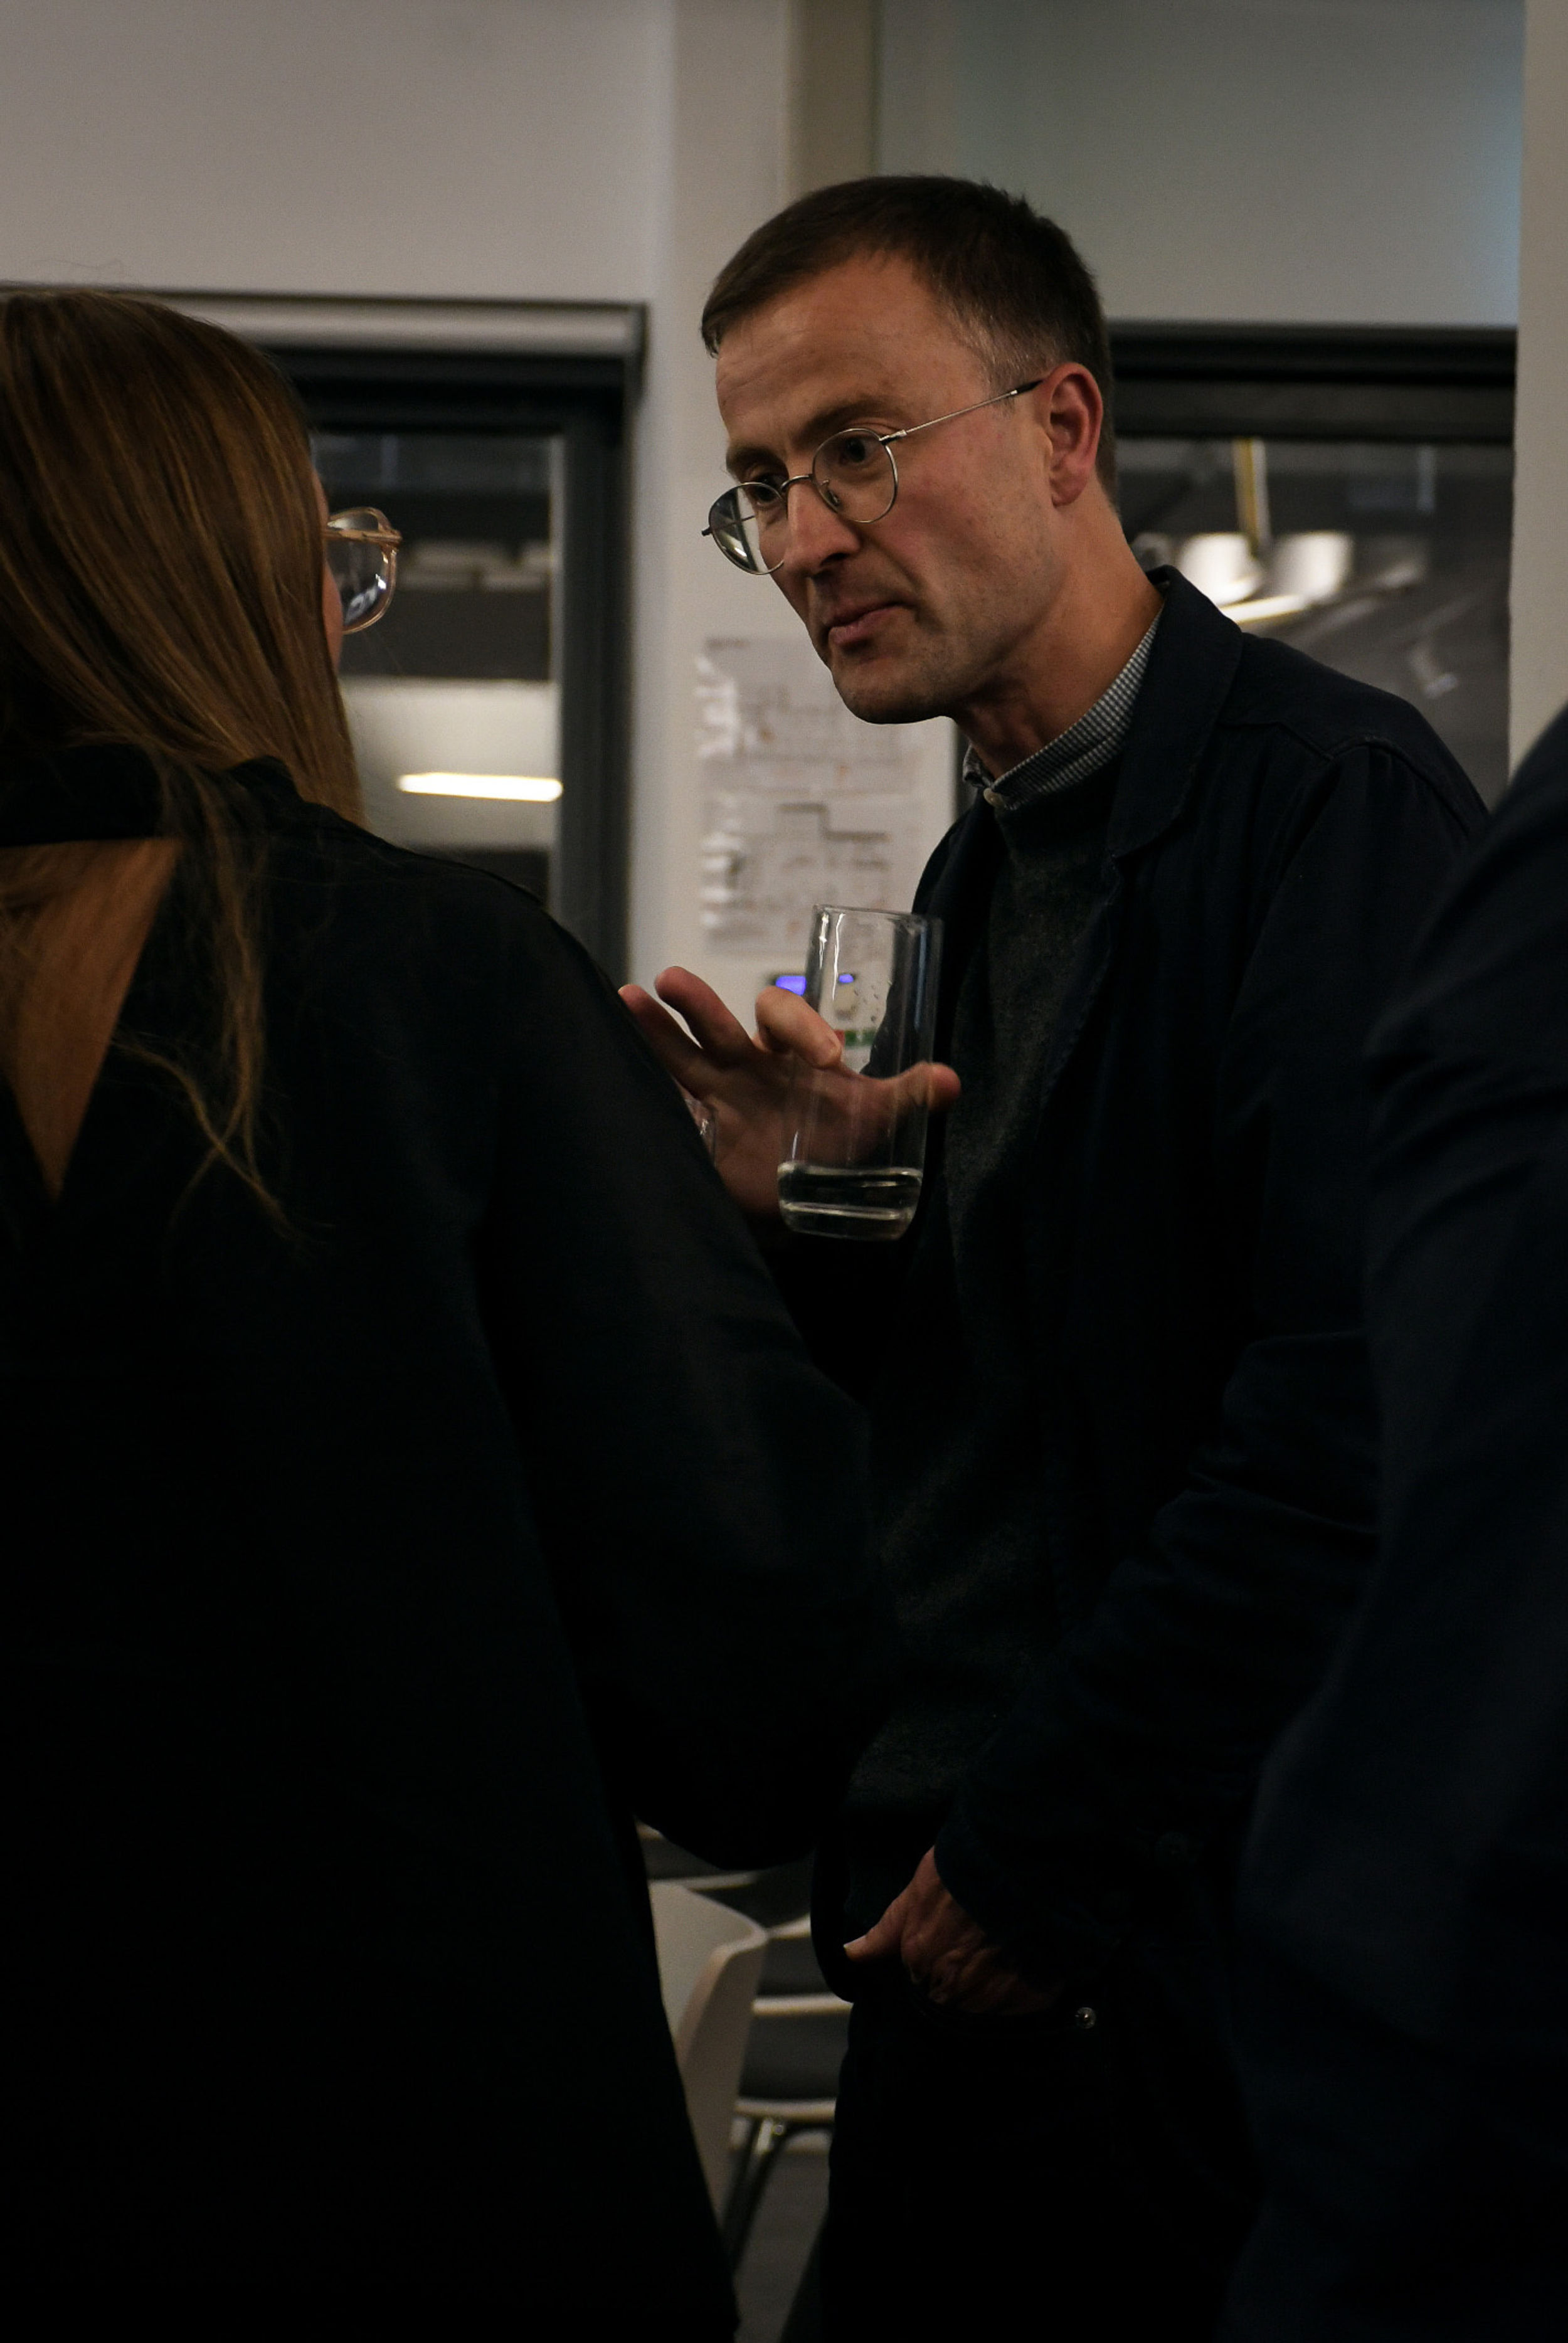 A man wearing glasses holding a glass and talking to a woman.